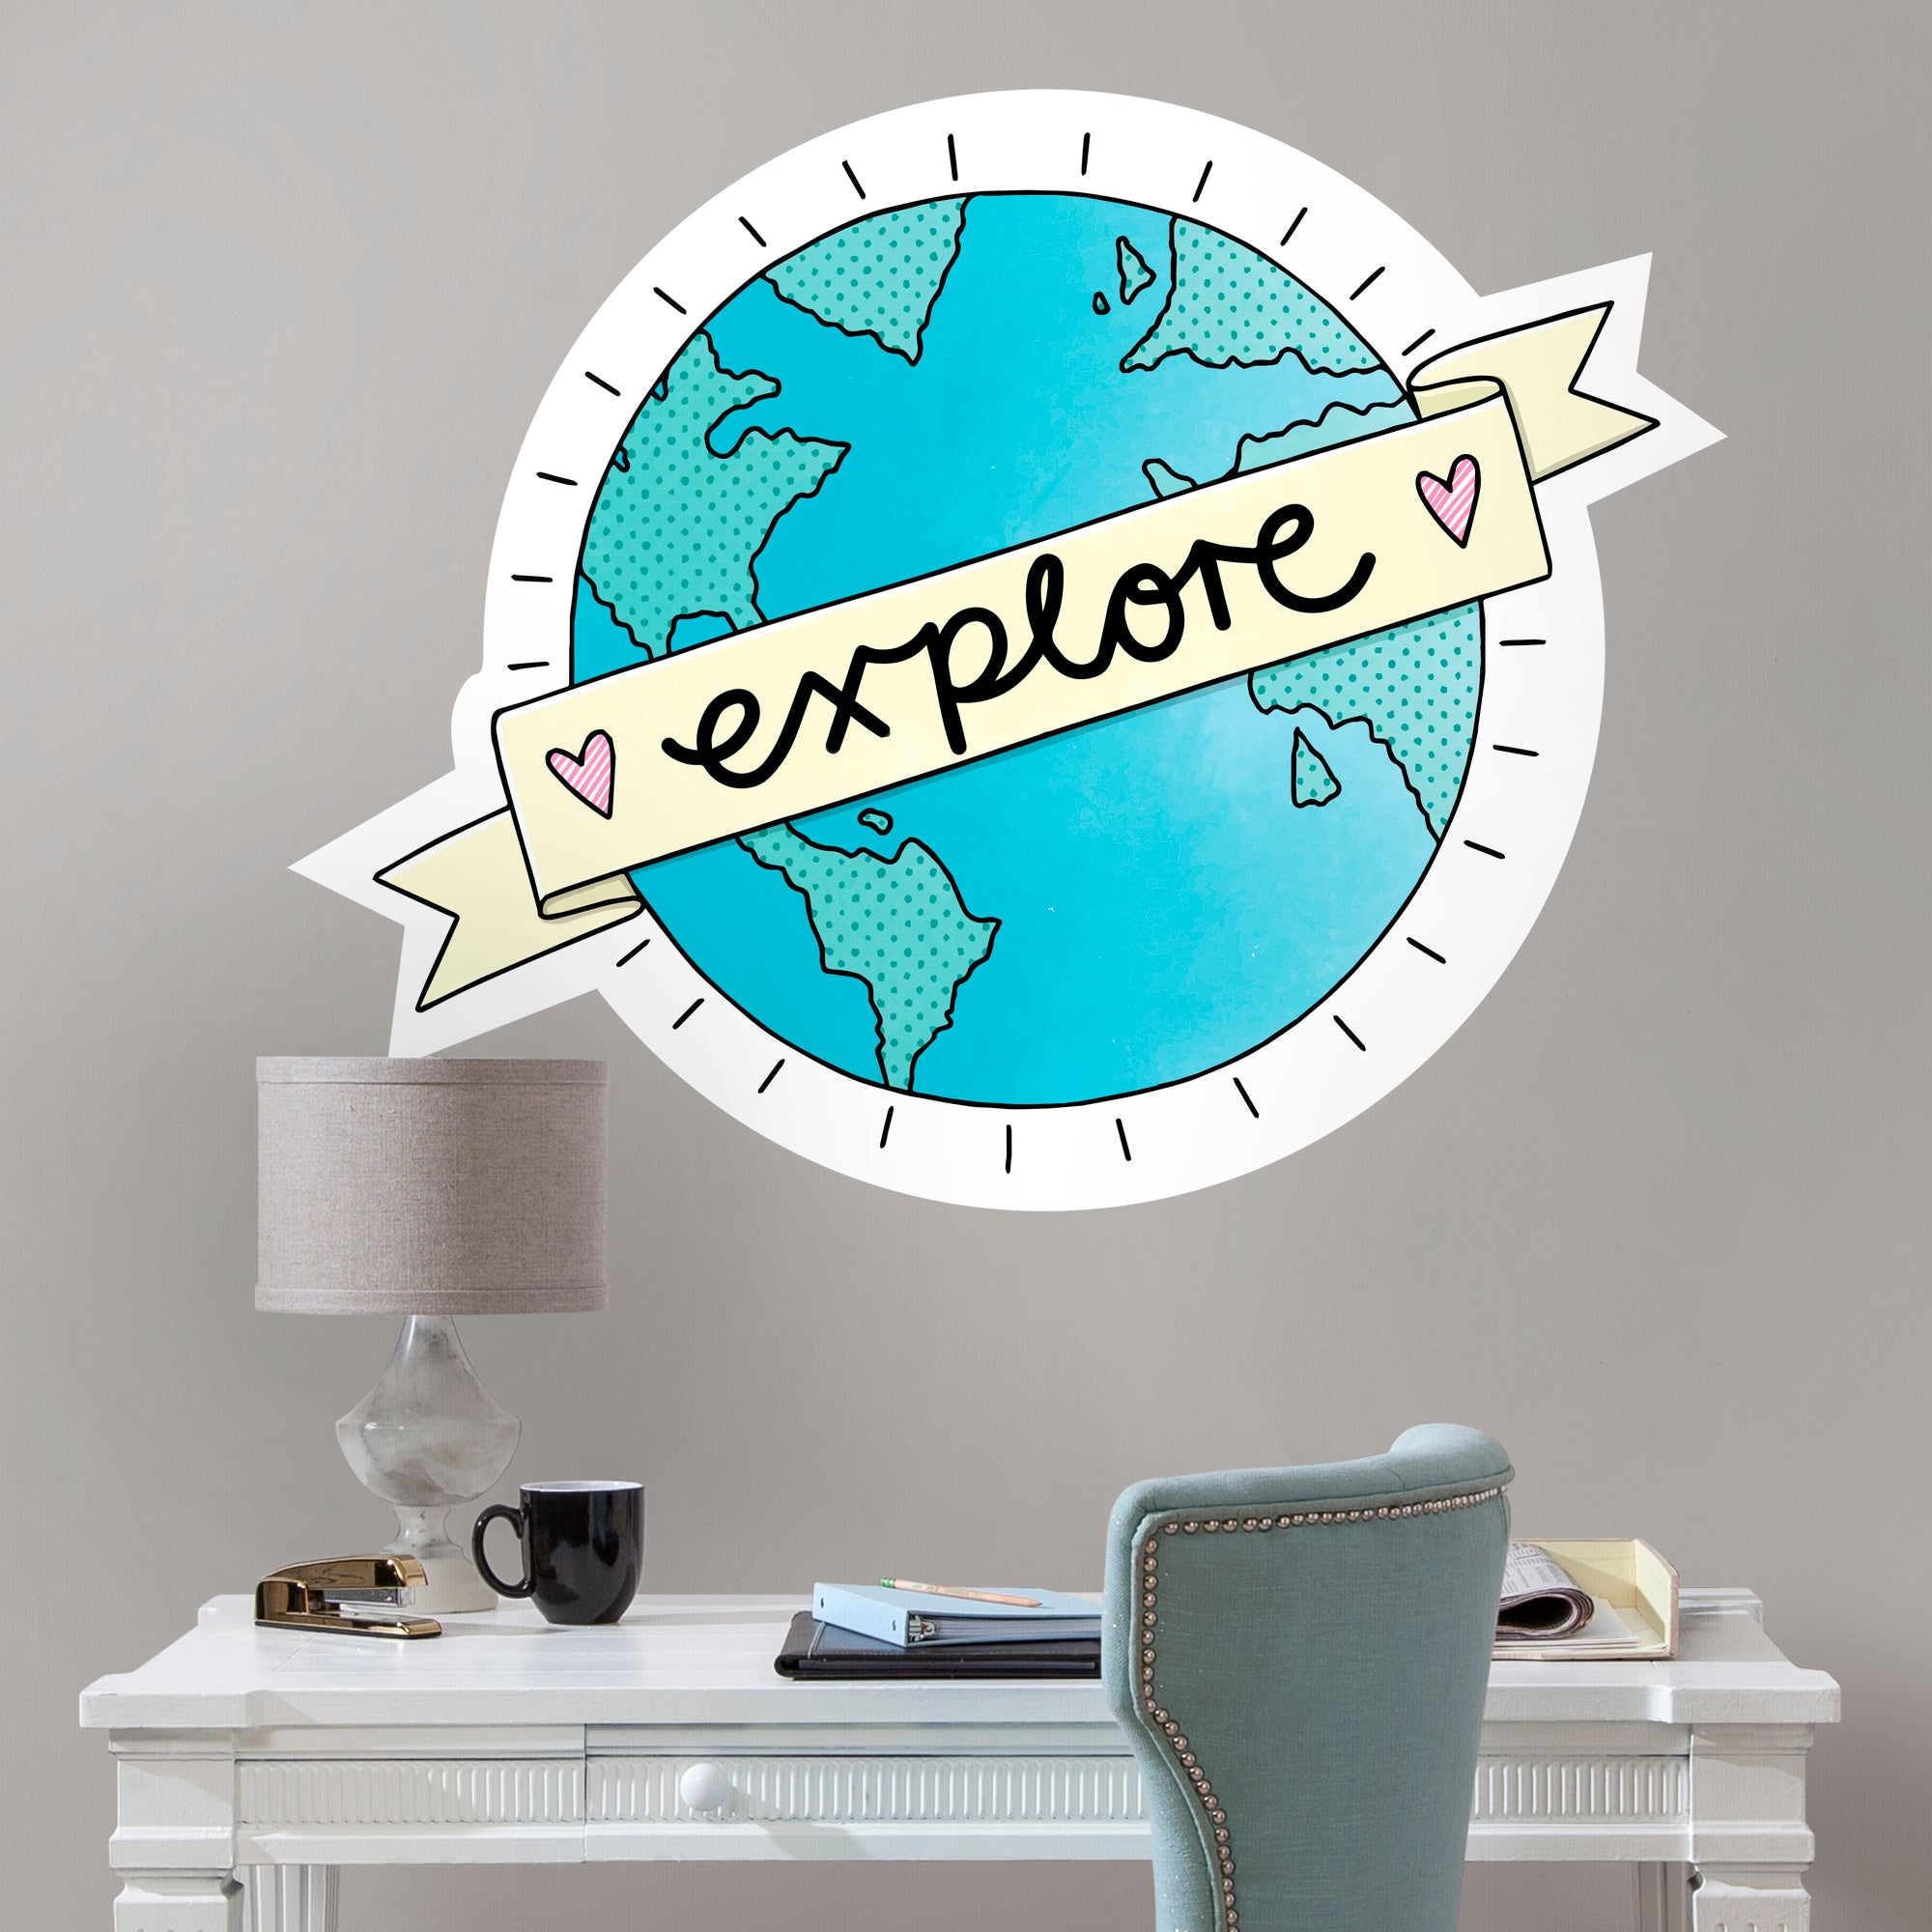 Explore Earth - Officially Licensed Big Moods Removable Wall Decal Giant Decal (48"W x 38"H) by Fathead | Vinyl